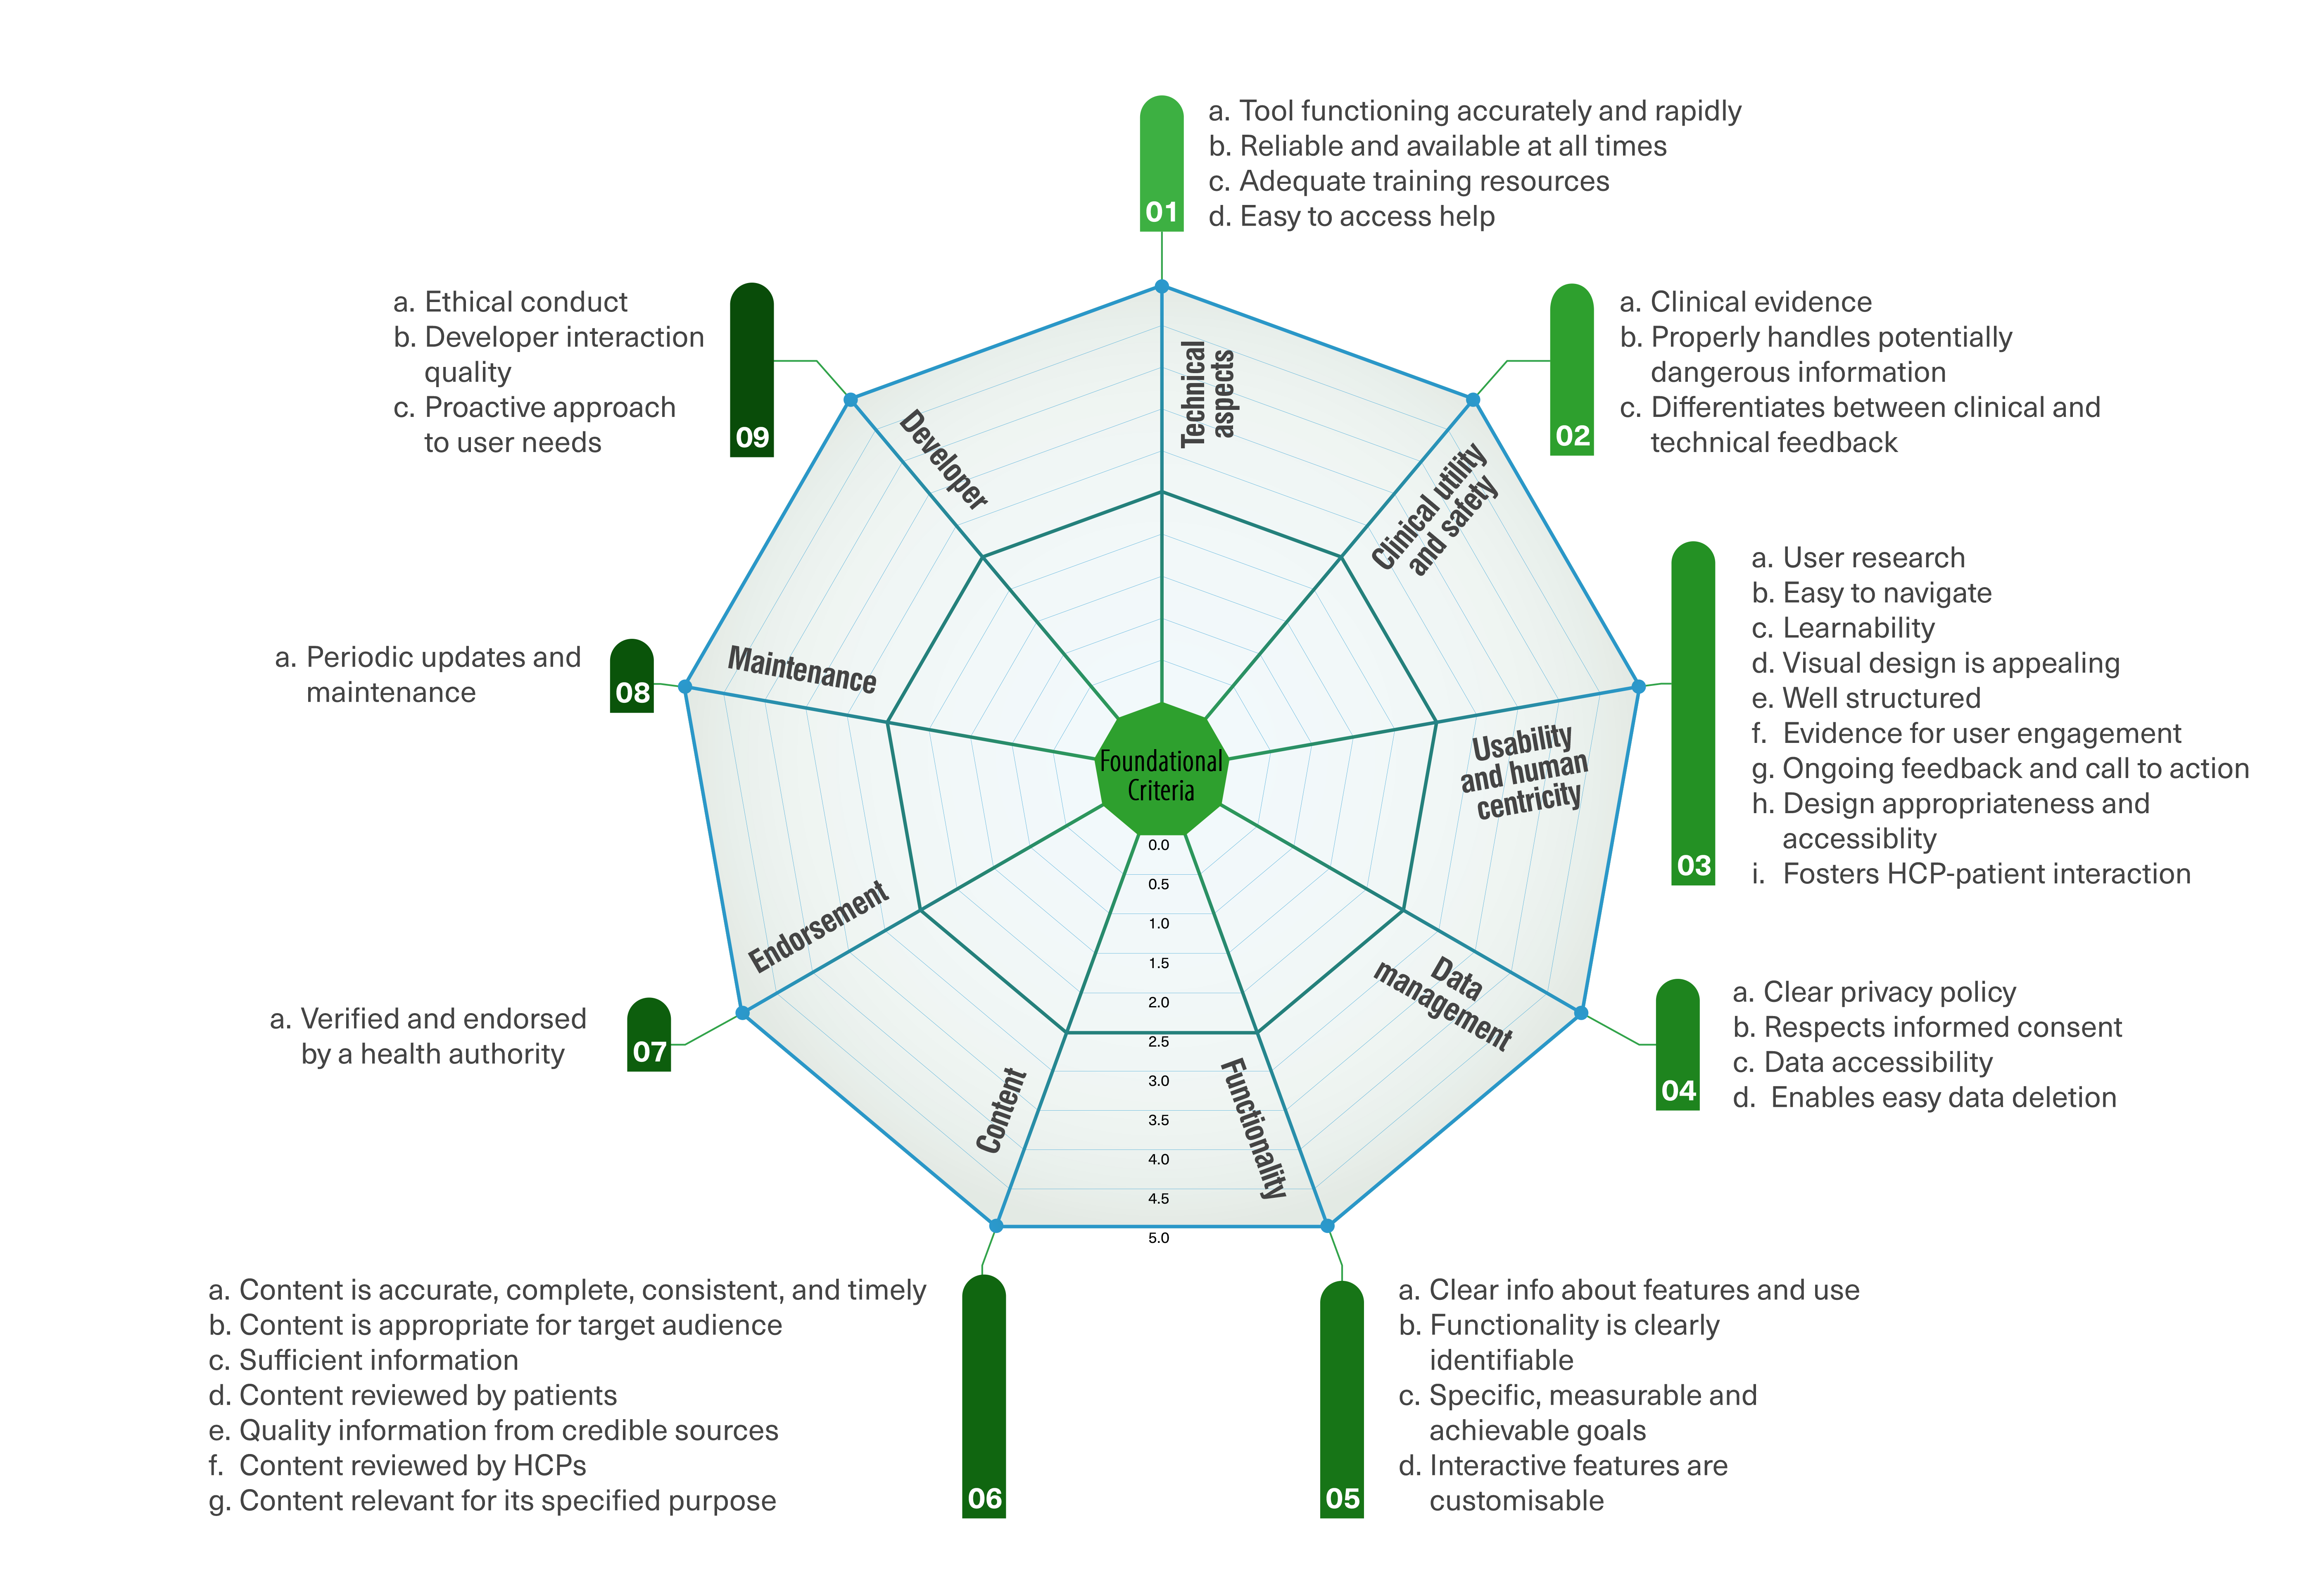 Figure 8 Foundational criteria clusters of the sociotechnical framework to assess patient-facing eHealth tools.png